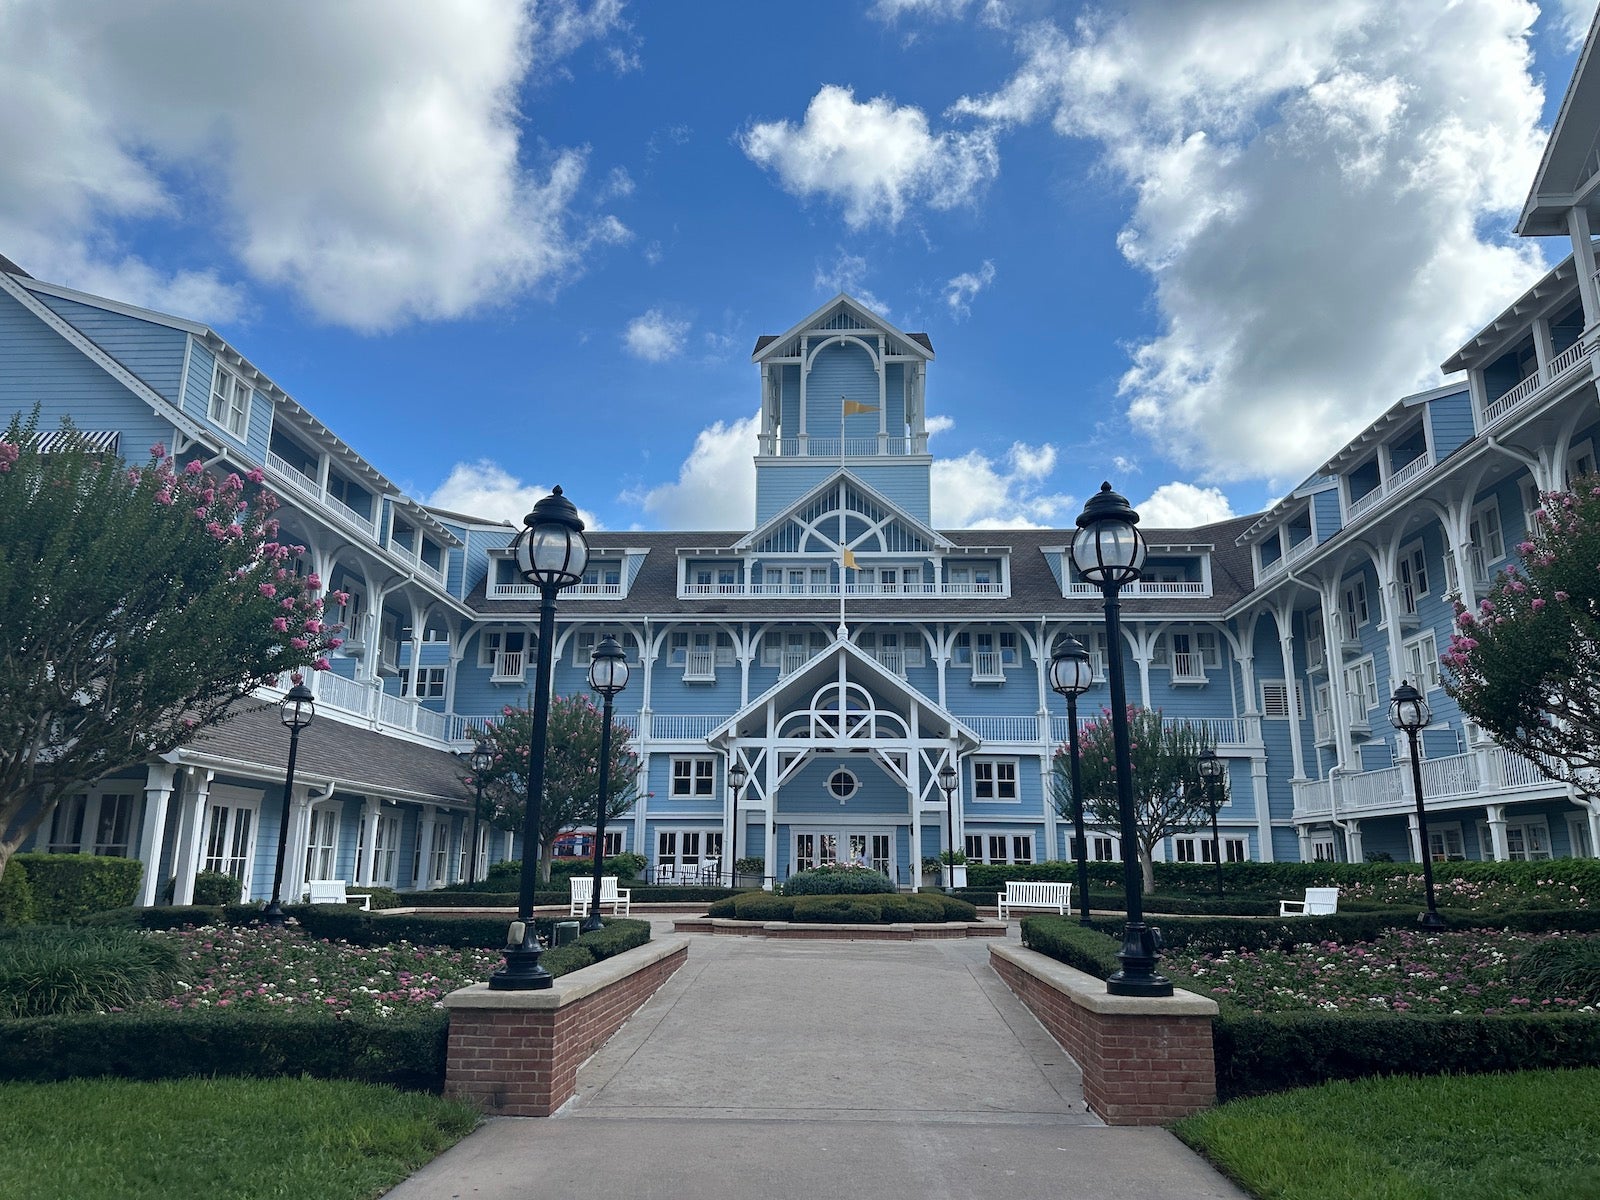 A review of Disney's Beach Club Resort - The Points Guy